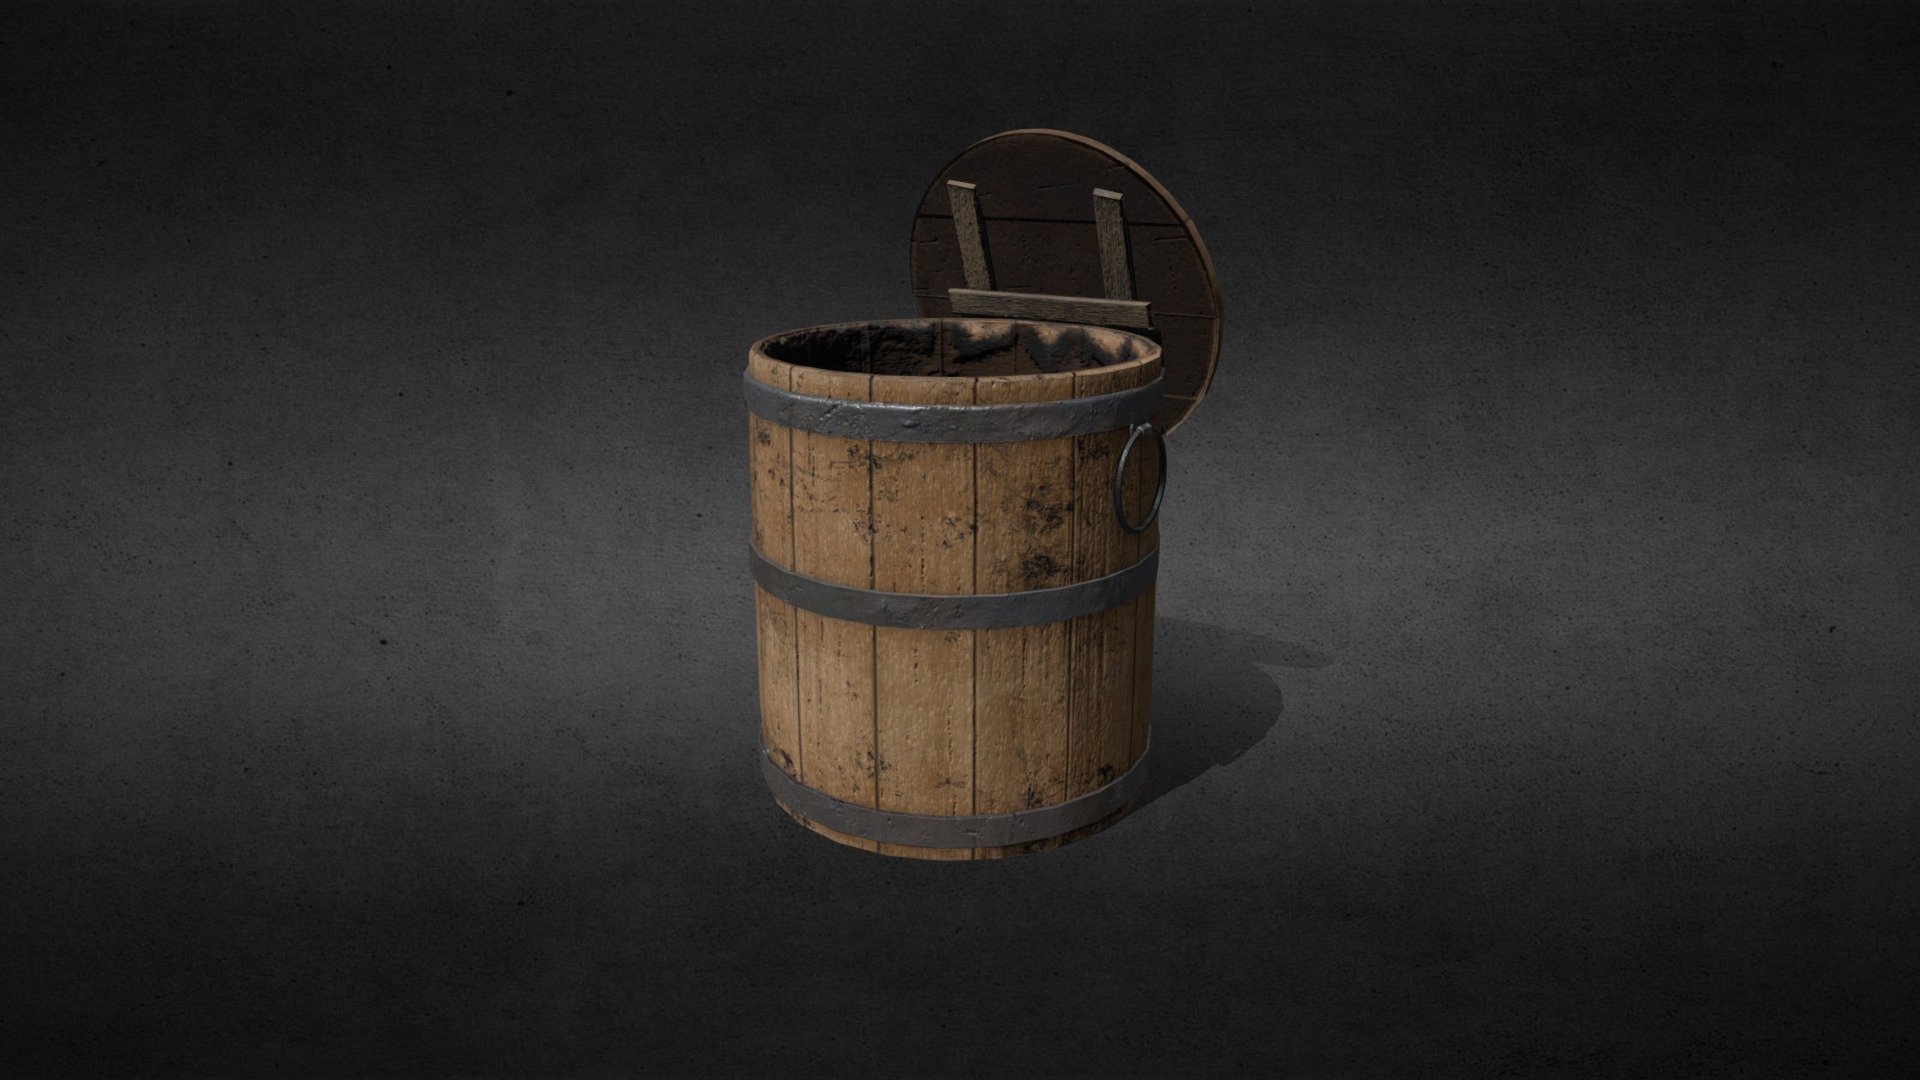 Realistic game ready 3D asset with PBR textures for the project Gulag.cz

Software used: Bledner, Marmoset Toolbag, Substance Painter

Toilet for prisoners, which was also called “Parasha” in prison camps in the USSR.

During the functioning of correctional labor camps in the USSR (more commonly known as GULAG camps), many people were sent to build railways, canals and similar infrastructure constructions. Prisoners and their management used improvised materials for the device of daily life. The shape of the barrel was quite simple to manufacture and did not require much effort. That is why this type of toilets was common in the cells of prisoners in labor camps - GULAG Toilet/ Parasha - 3D model by _progrev_shipa_ (@_progrev_shipa) 3d model